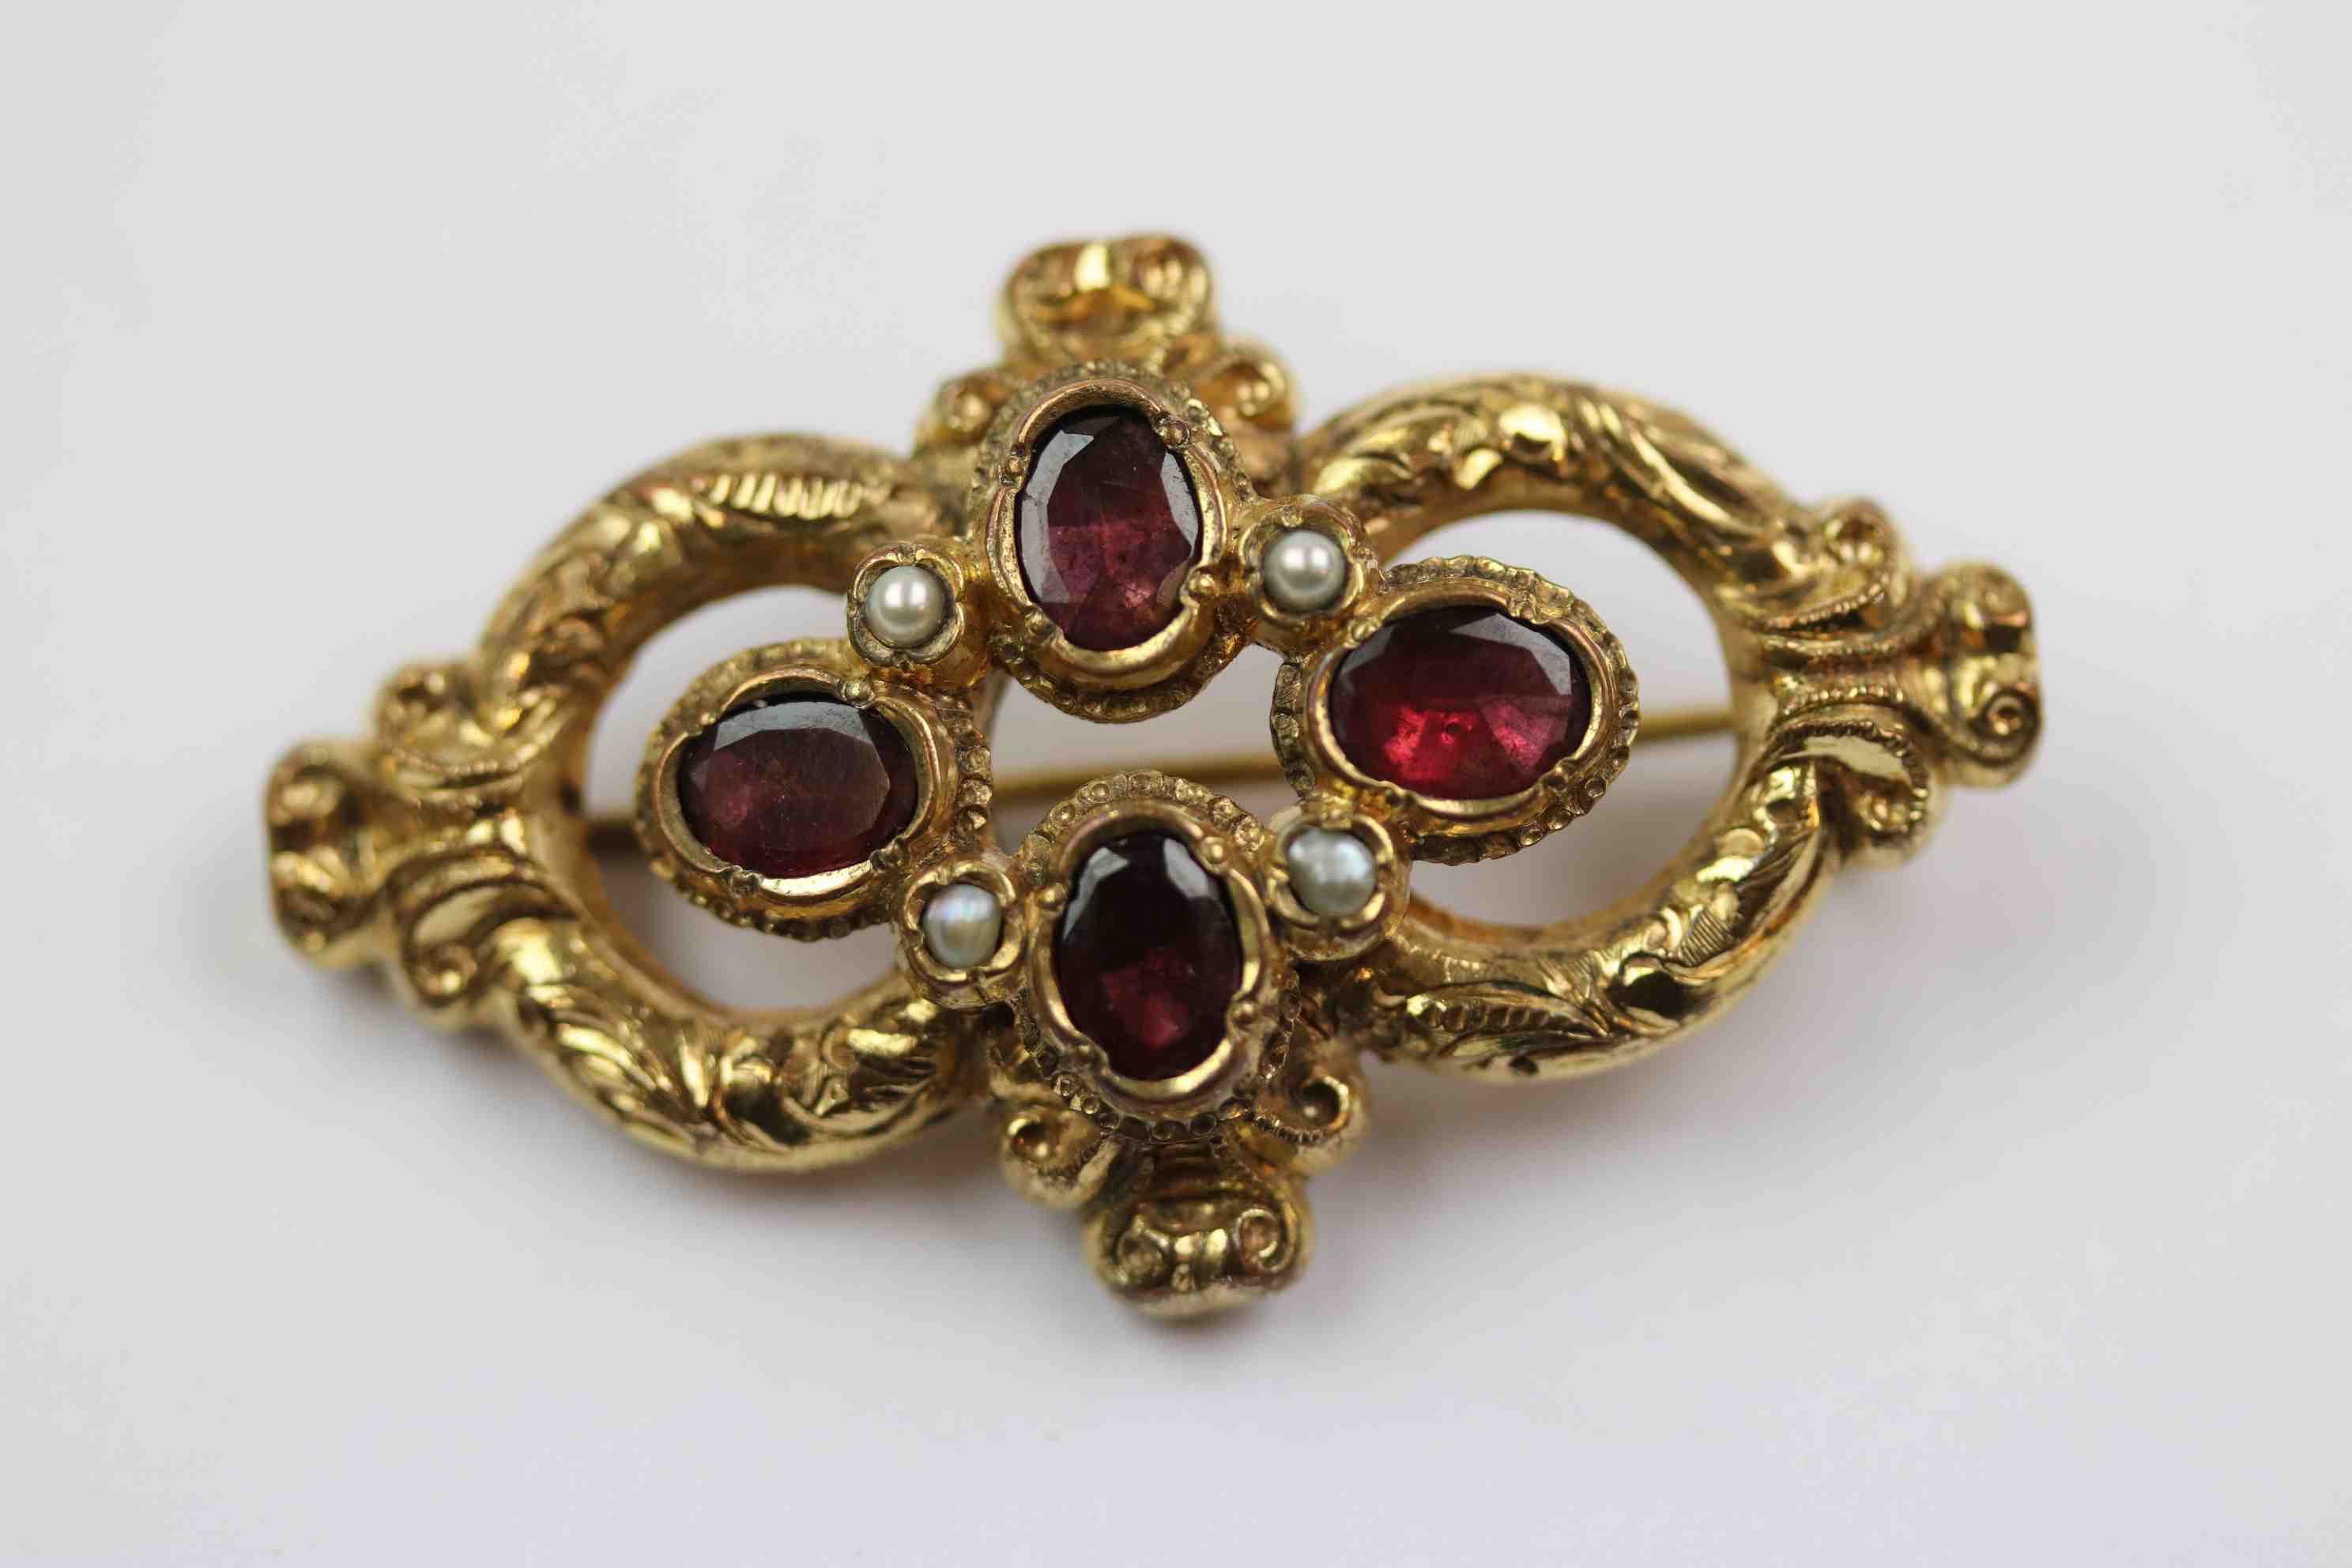 19th century garnet and seed pearl yellow metal brooch, four oval mixed cut garnets in quatre foil - Image 3 of 6